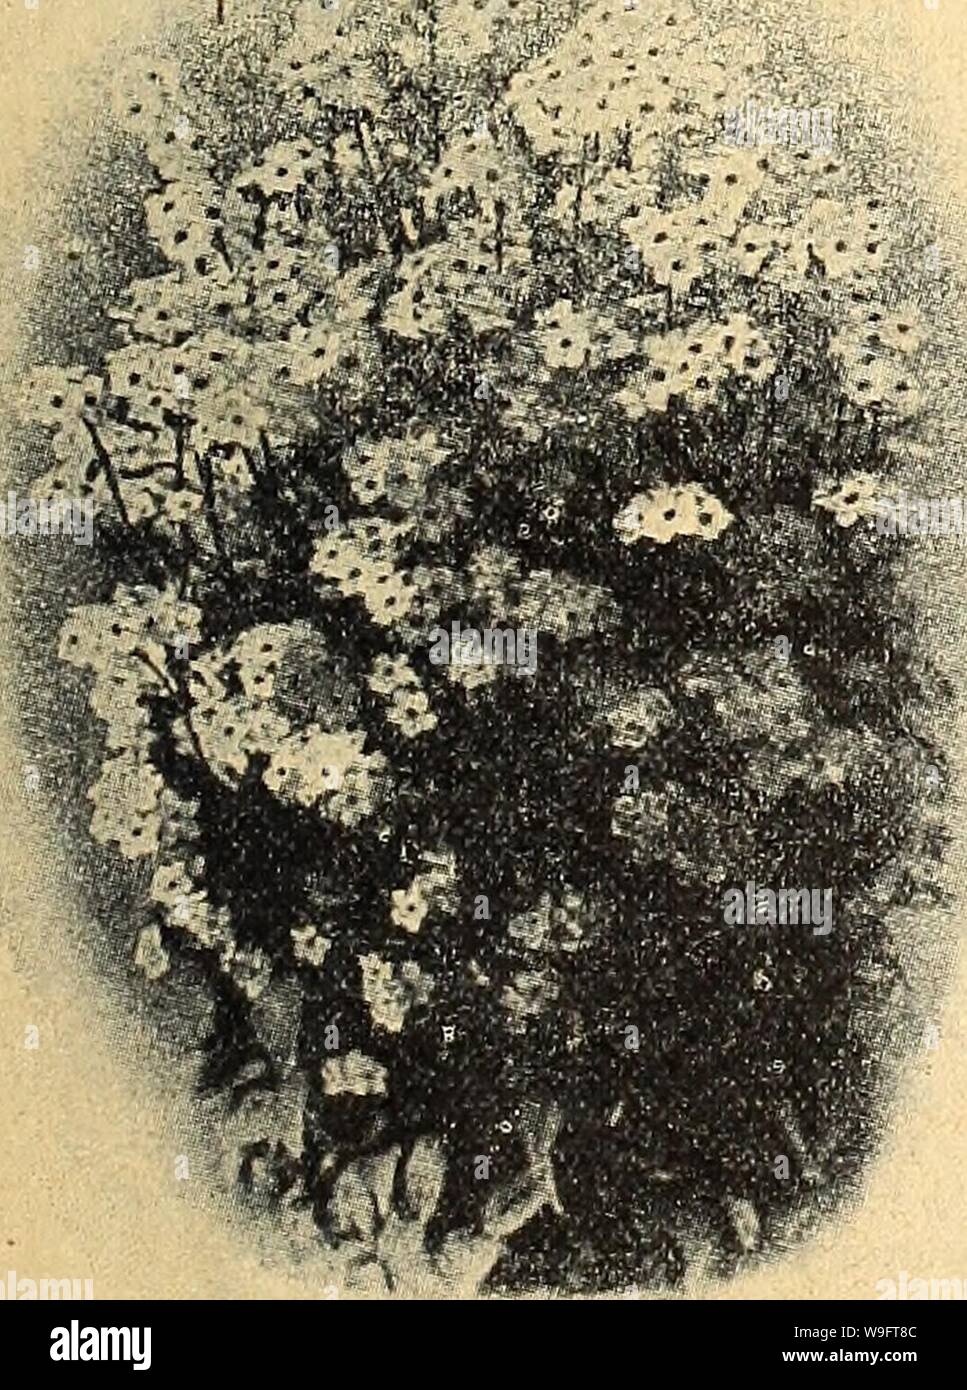 Archive image from page 68 of Currie's farm & garden annual. Currie's farm & garden annual : spring 1922 47th year  curriesfarmgarde19curr 5 Year: 1922 ( Soak Seeds of Japanese Morning Glory and Moon- Flowers, for 12 hours in ivarm Â«ater, or scrape off the outer shell at one of the ends before so-wing, to aid germination. Japanese Morning Glory. IMPERIAL JAPANESE MORNING GLORIES. These Japenese Morning Glories are indeed a revelation in the size and beauty of their flowers. Sow early in good, rich soil in a sunny spot In the garden, and water during dry, hot weather. . ,  Pkt. Choice Mixed Co Stock Photo